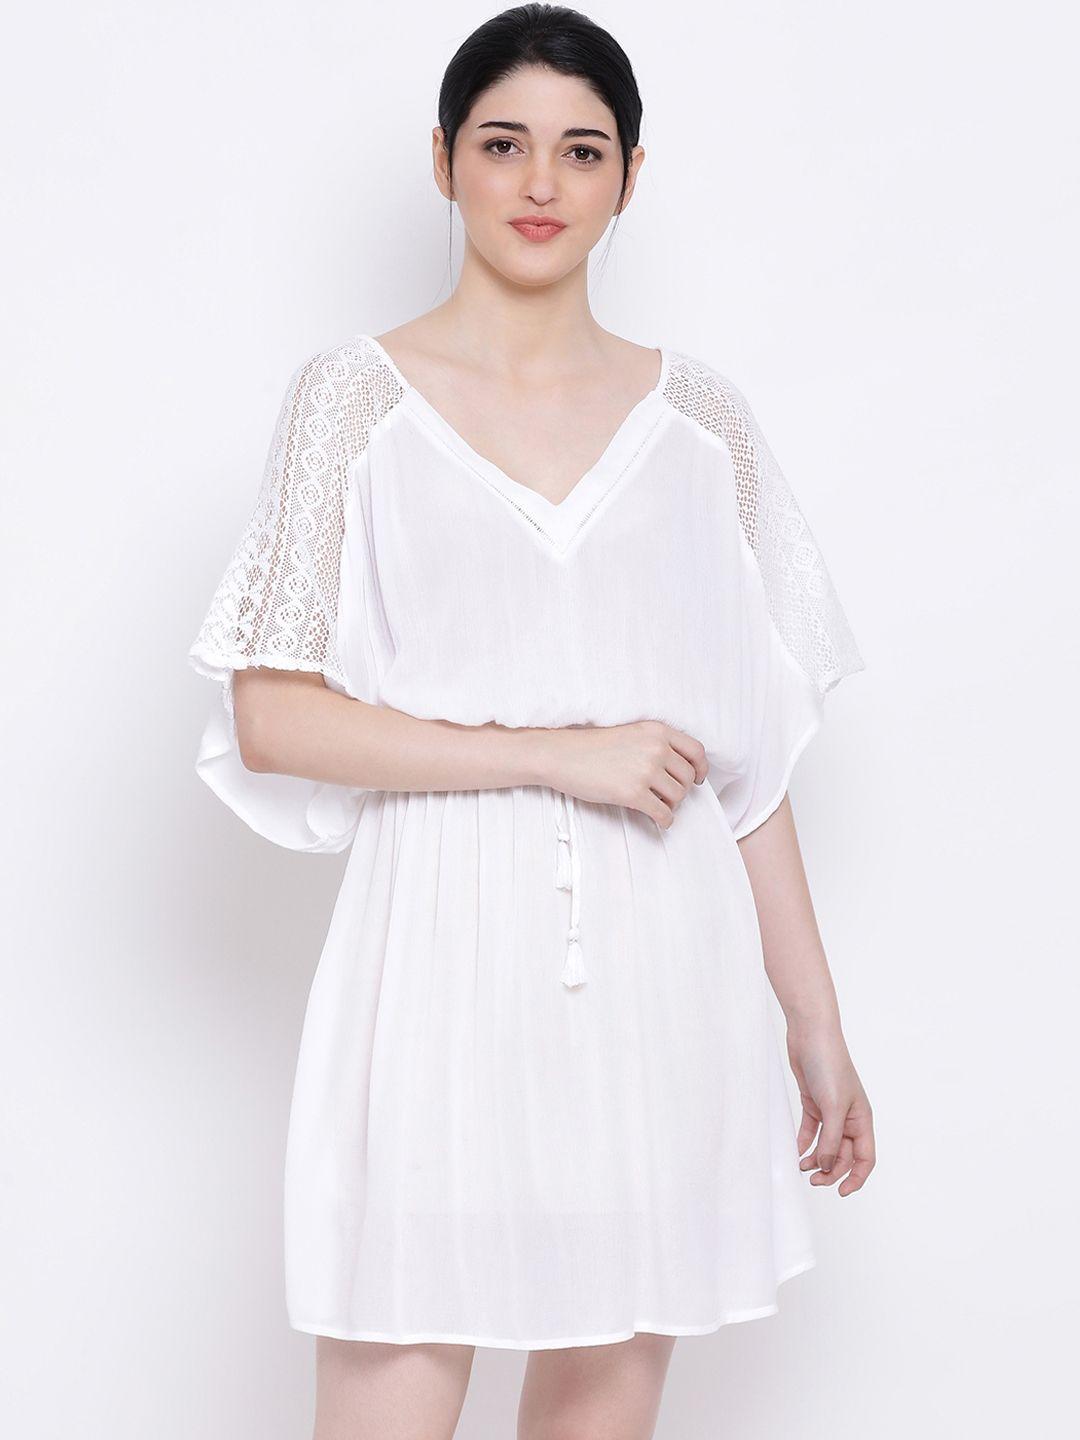 oxolloxo white solid nightdress